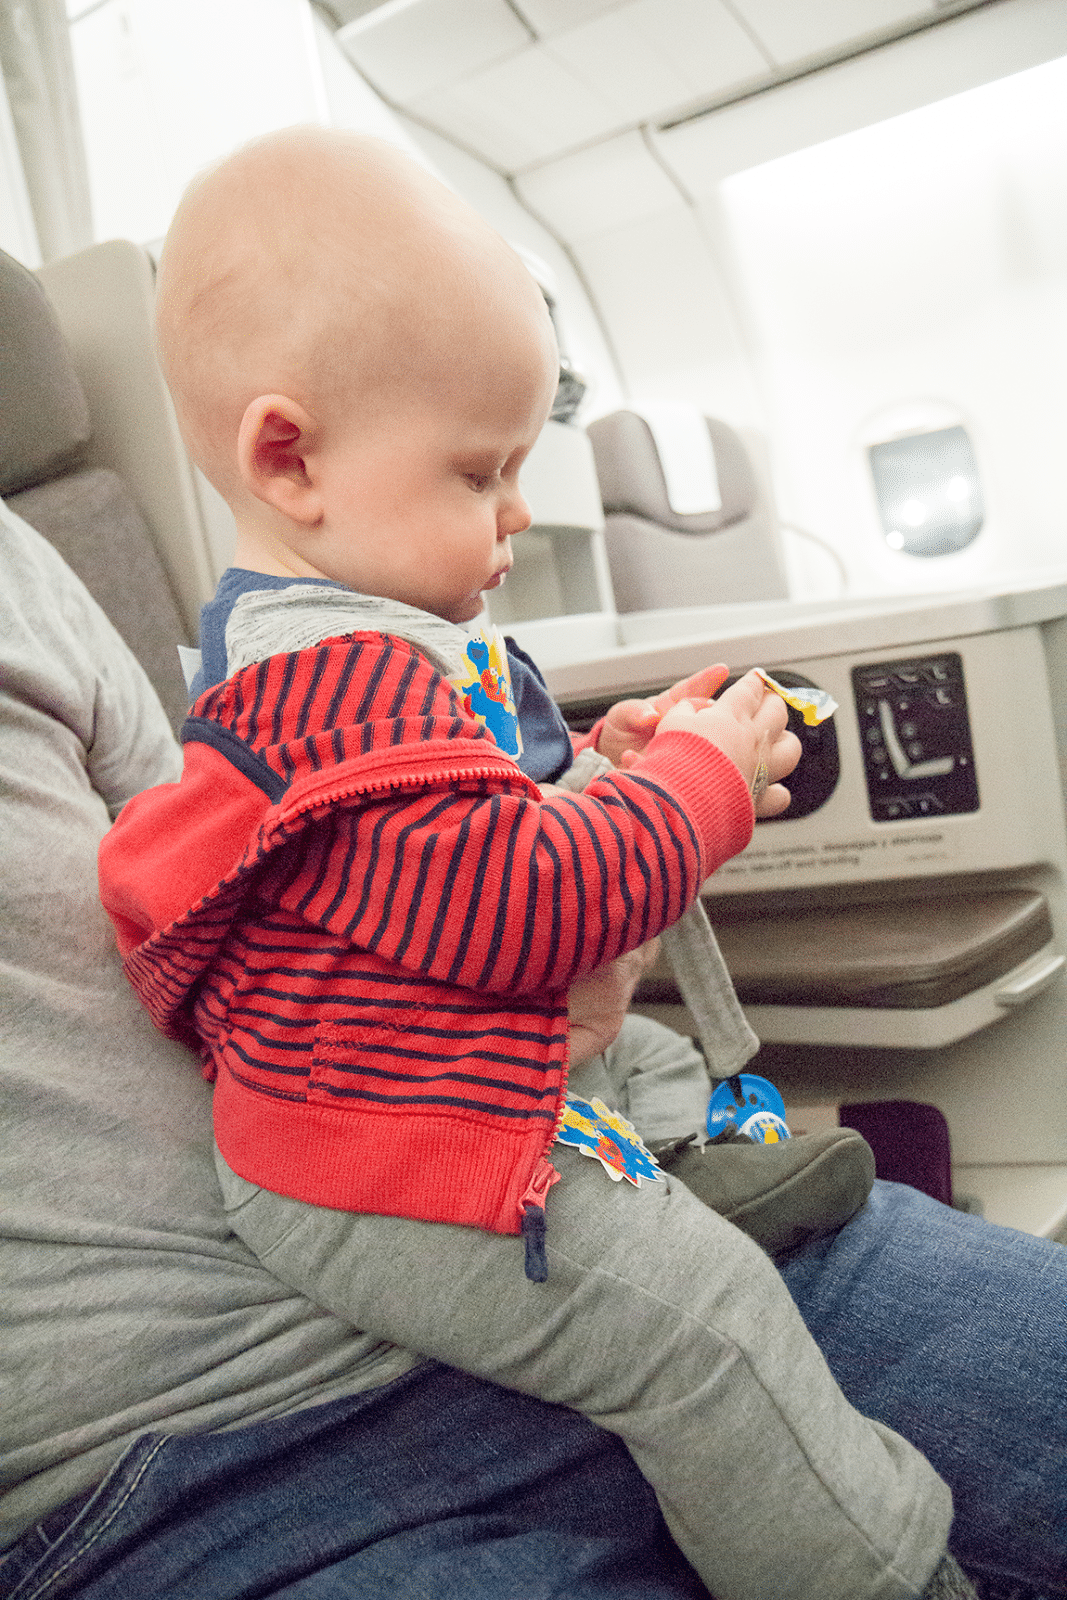 Tips for flying with a baby. 